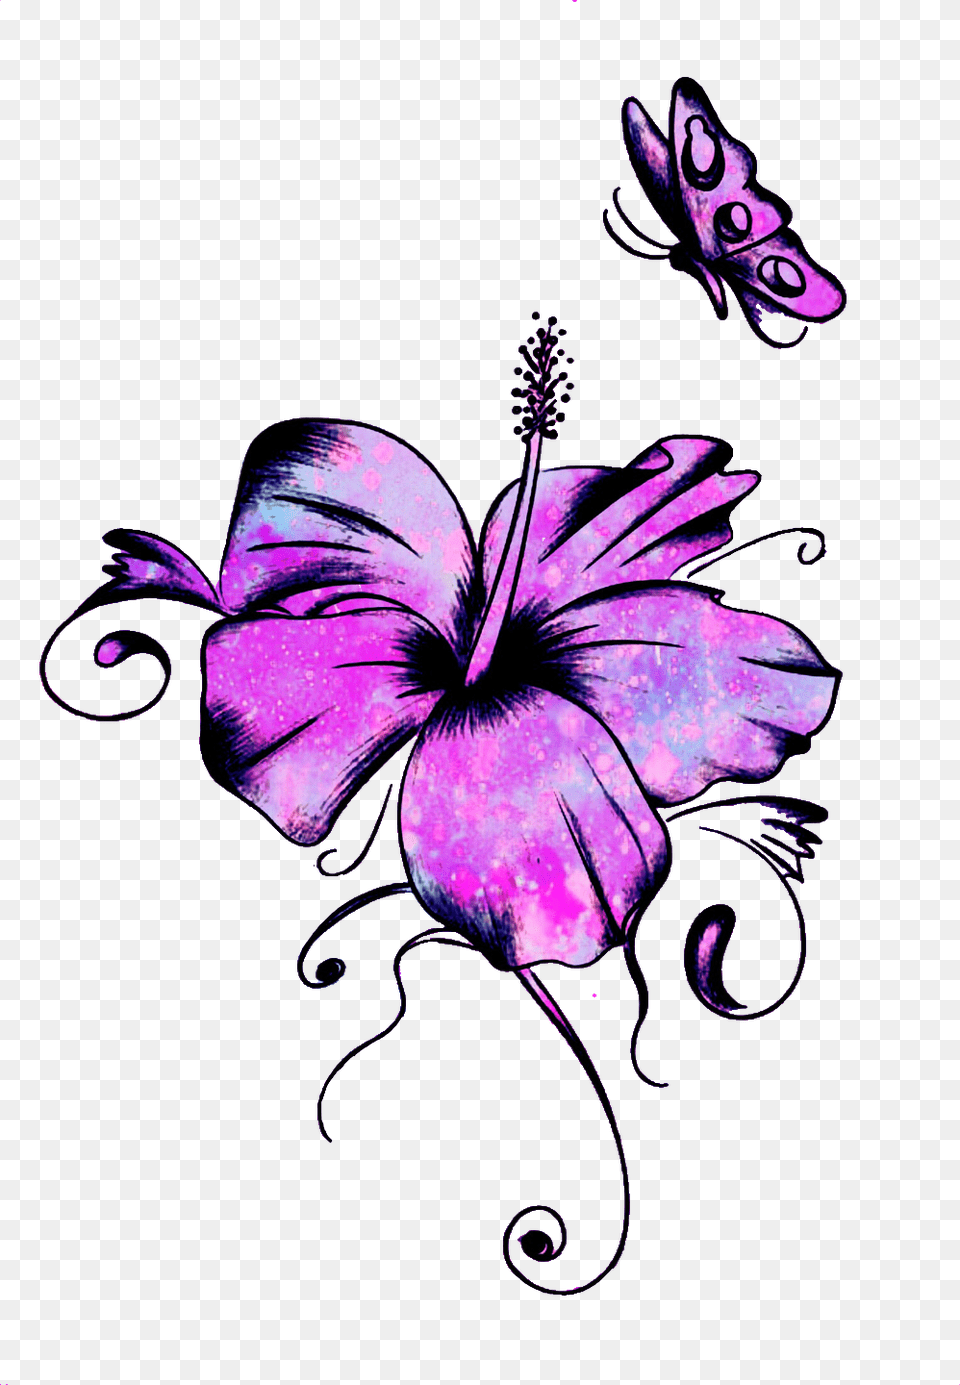 Ftestickers Mpink88 Glitter Sparkle Galaxy Flowers Hibiscus And Butterfly Tattoo, Purple, Woman, Person, Graphics Png Image